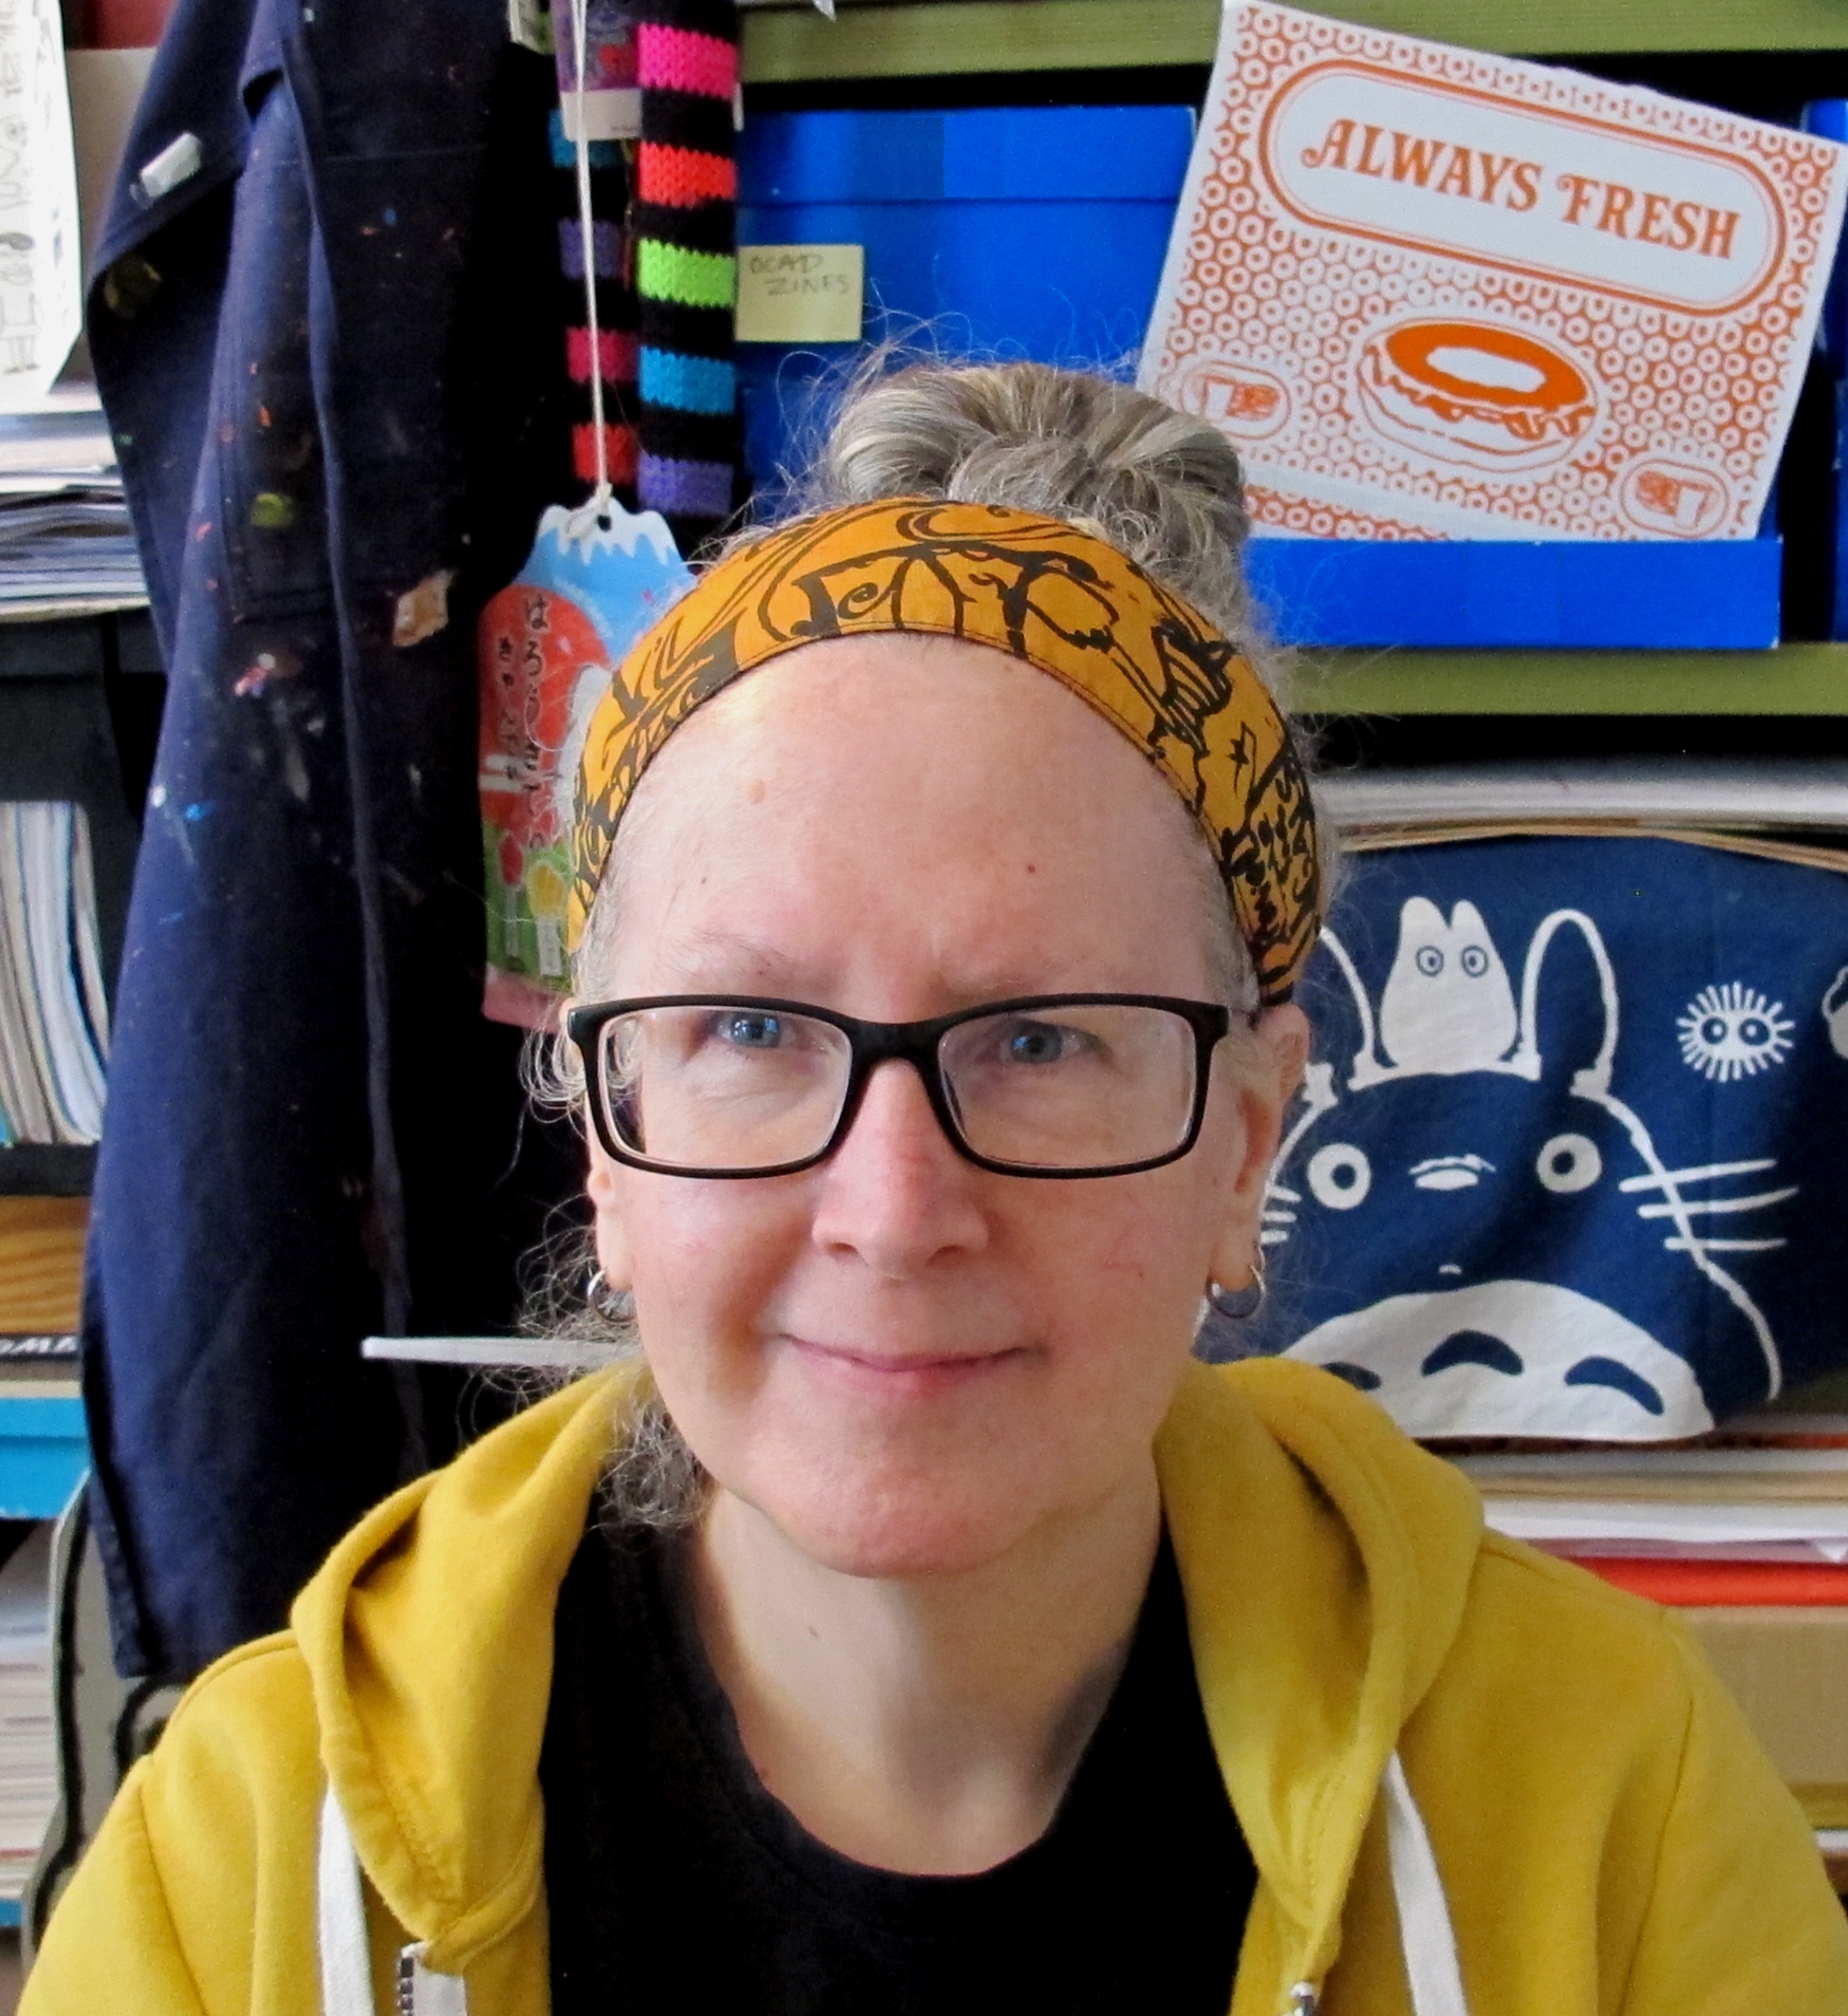 A woman with wearing a orange and black pattern head band, with grey hair pulled up into a bun. She is wearing black eyeglasses, has blue eyes and wearing a yellow hoodie with black t-shirt under